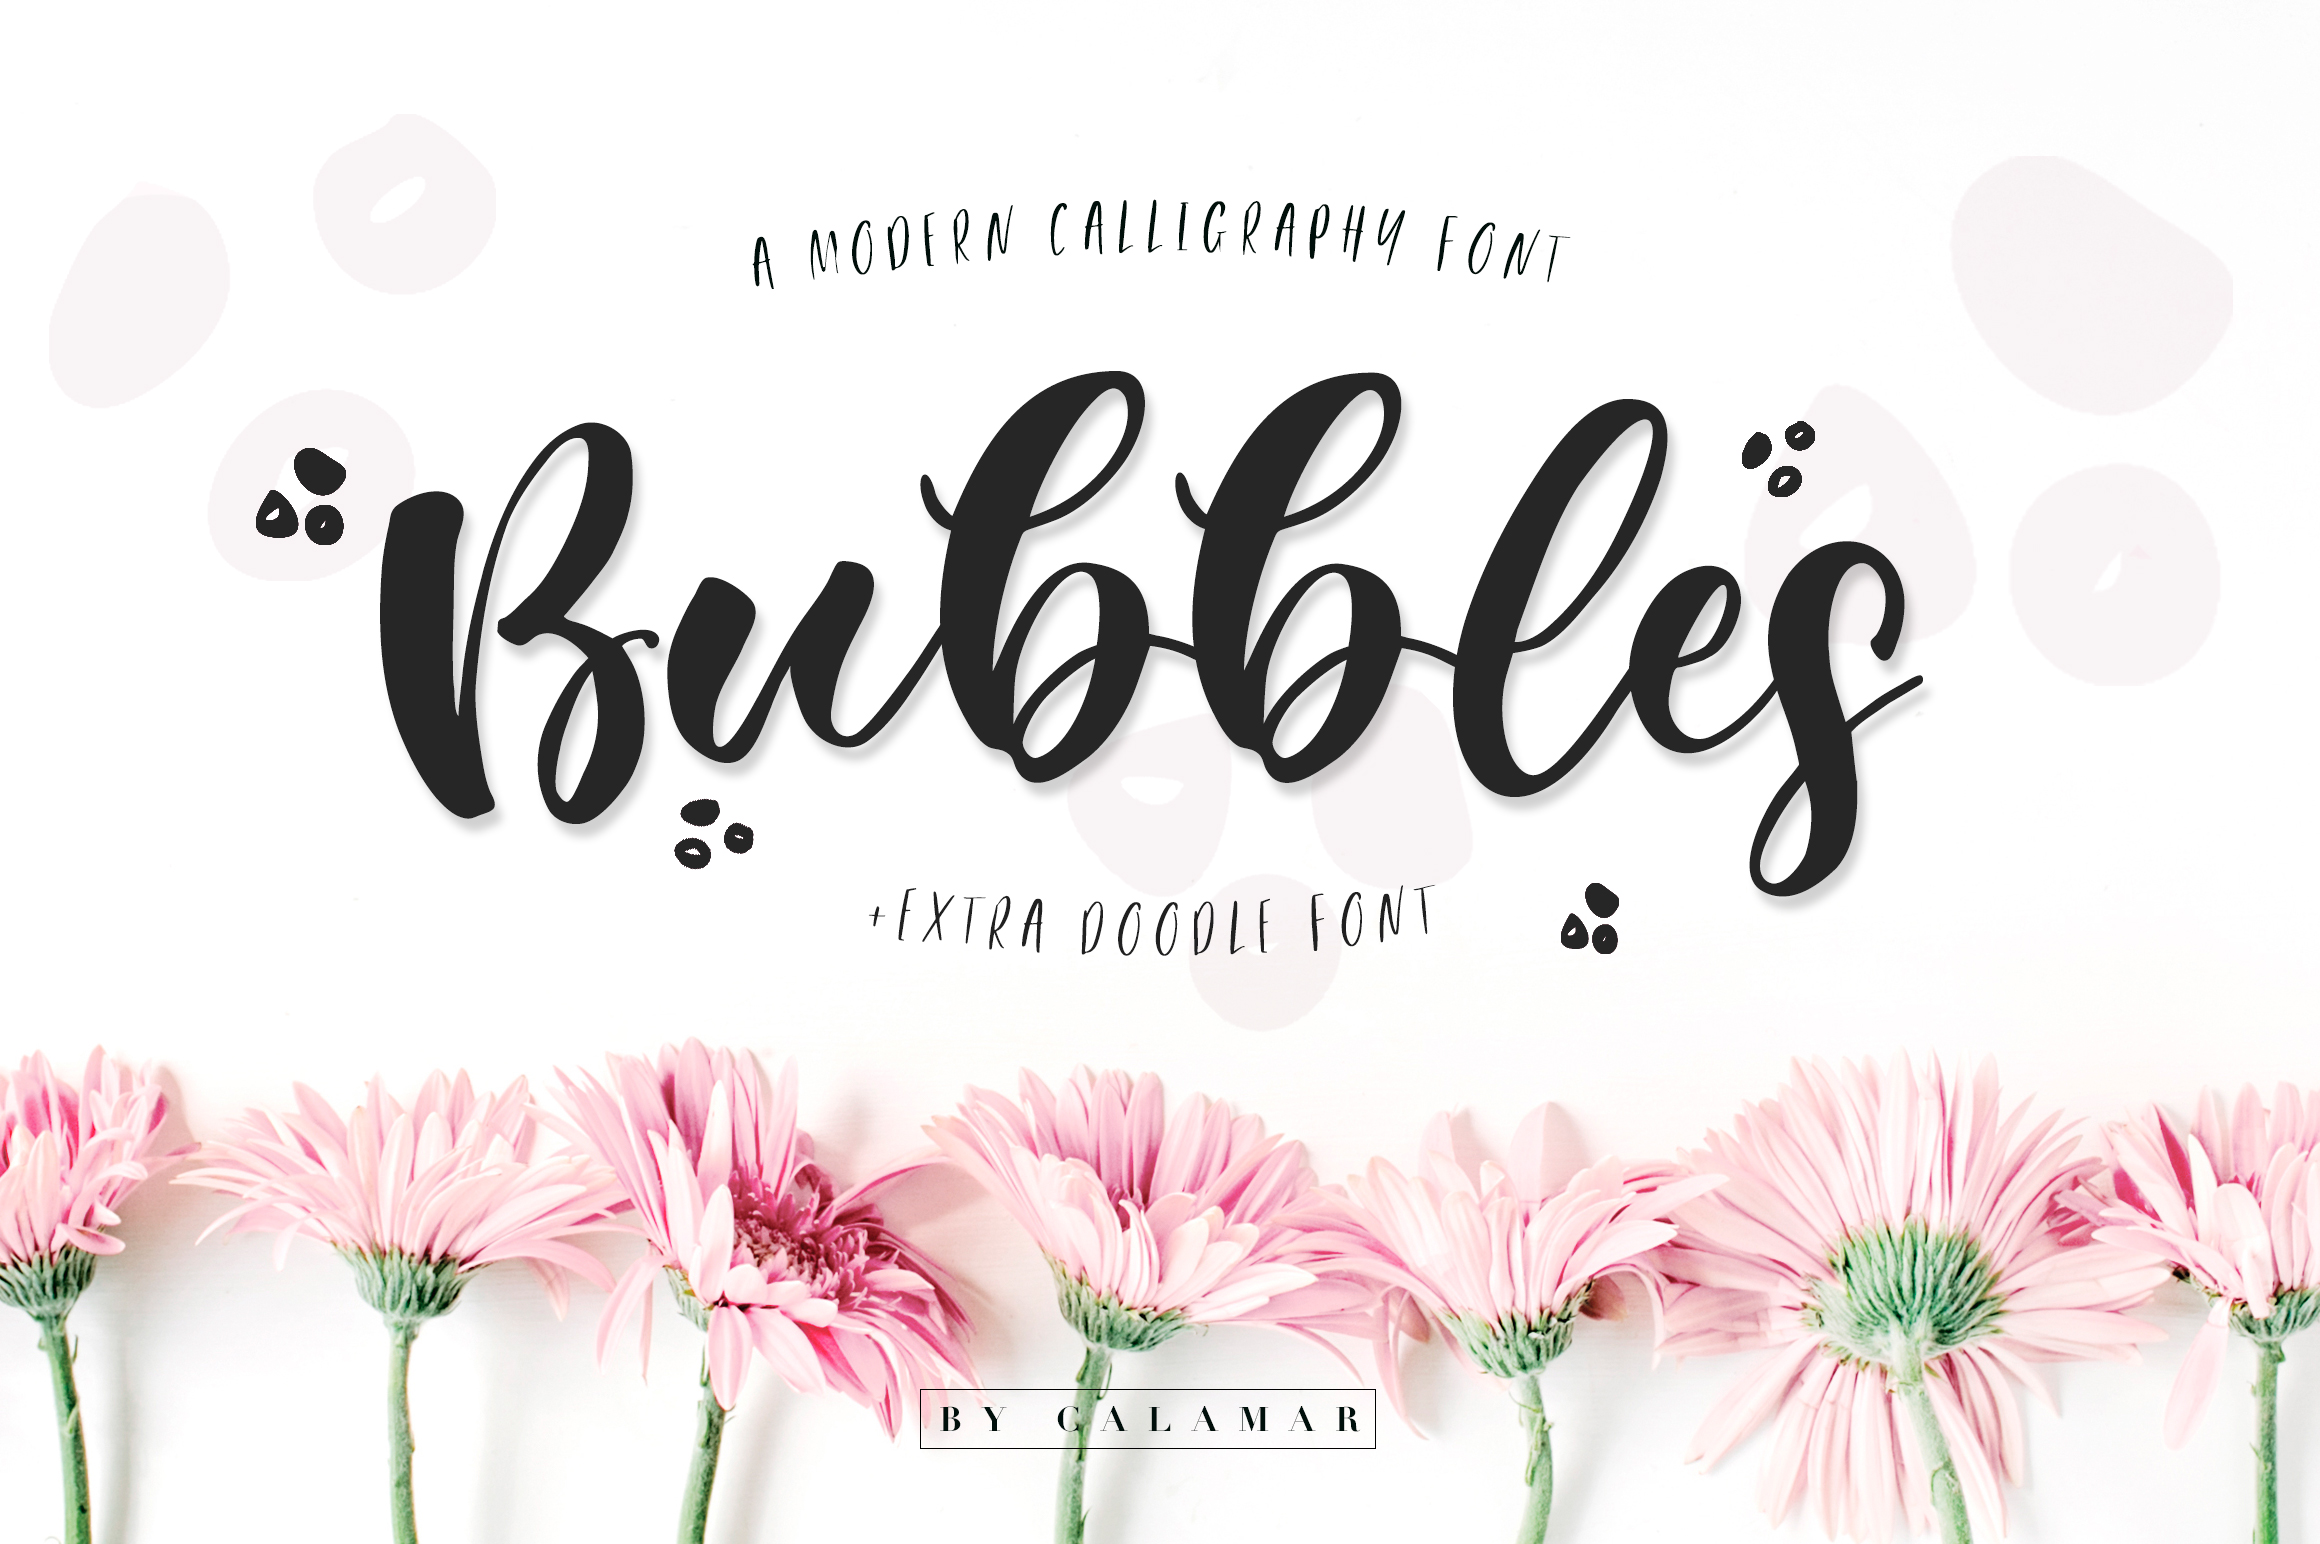 bubble letter cursive font with highlight